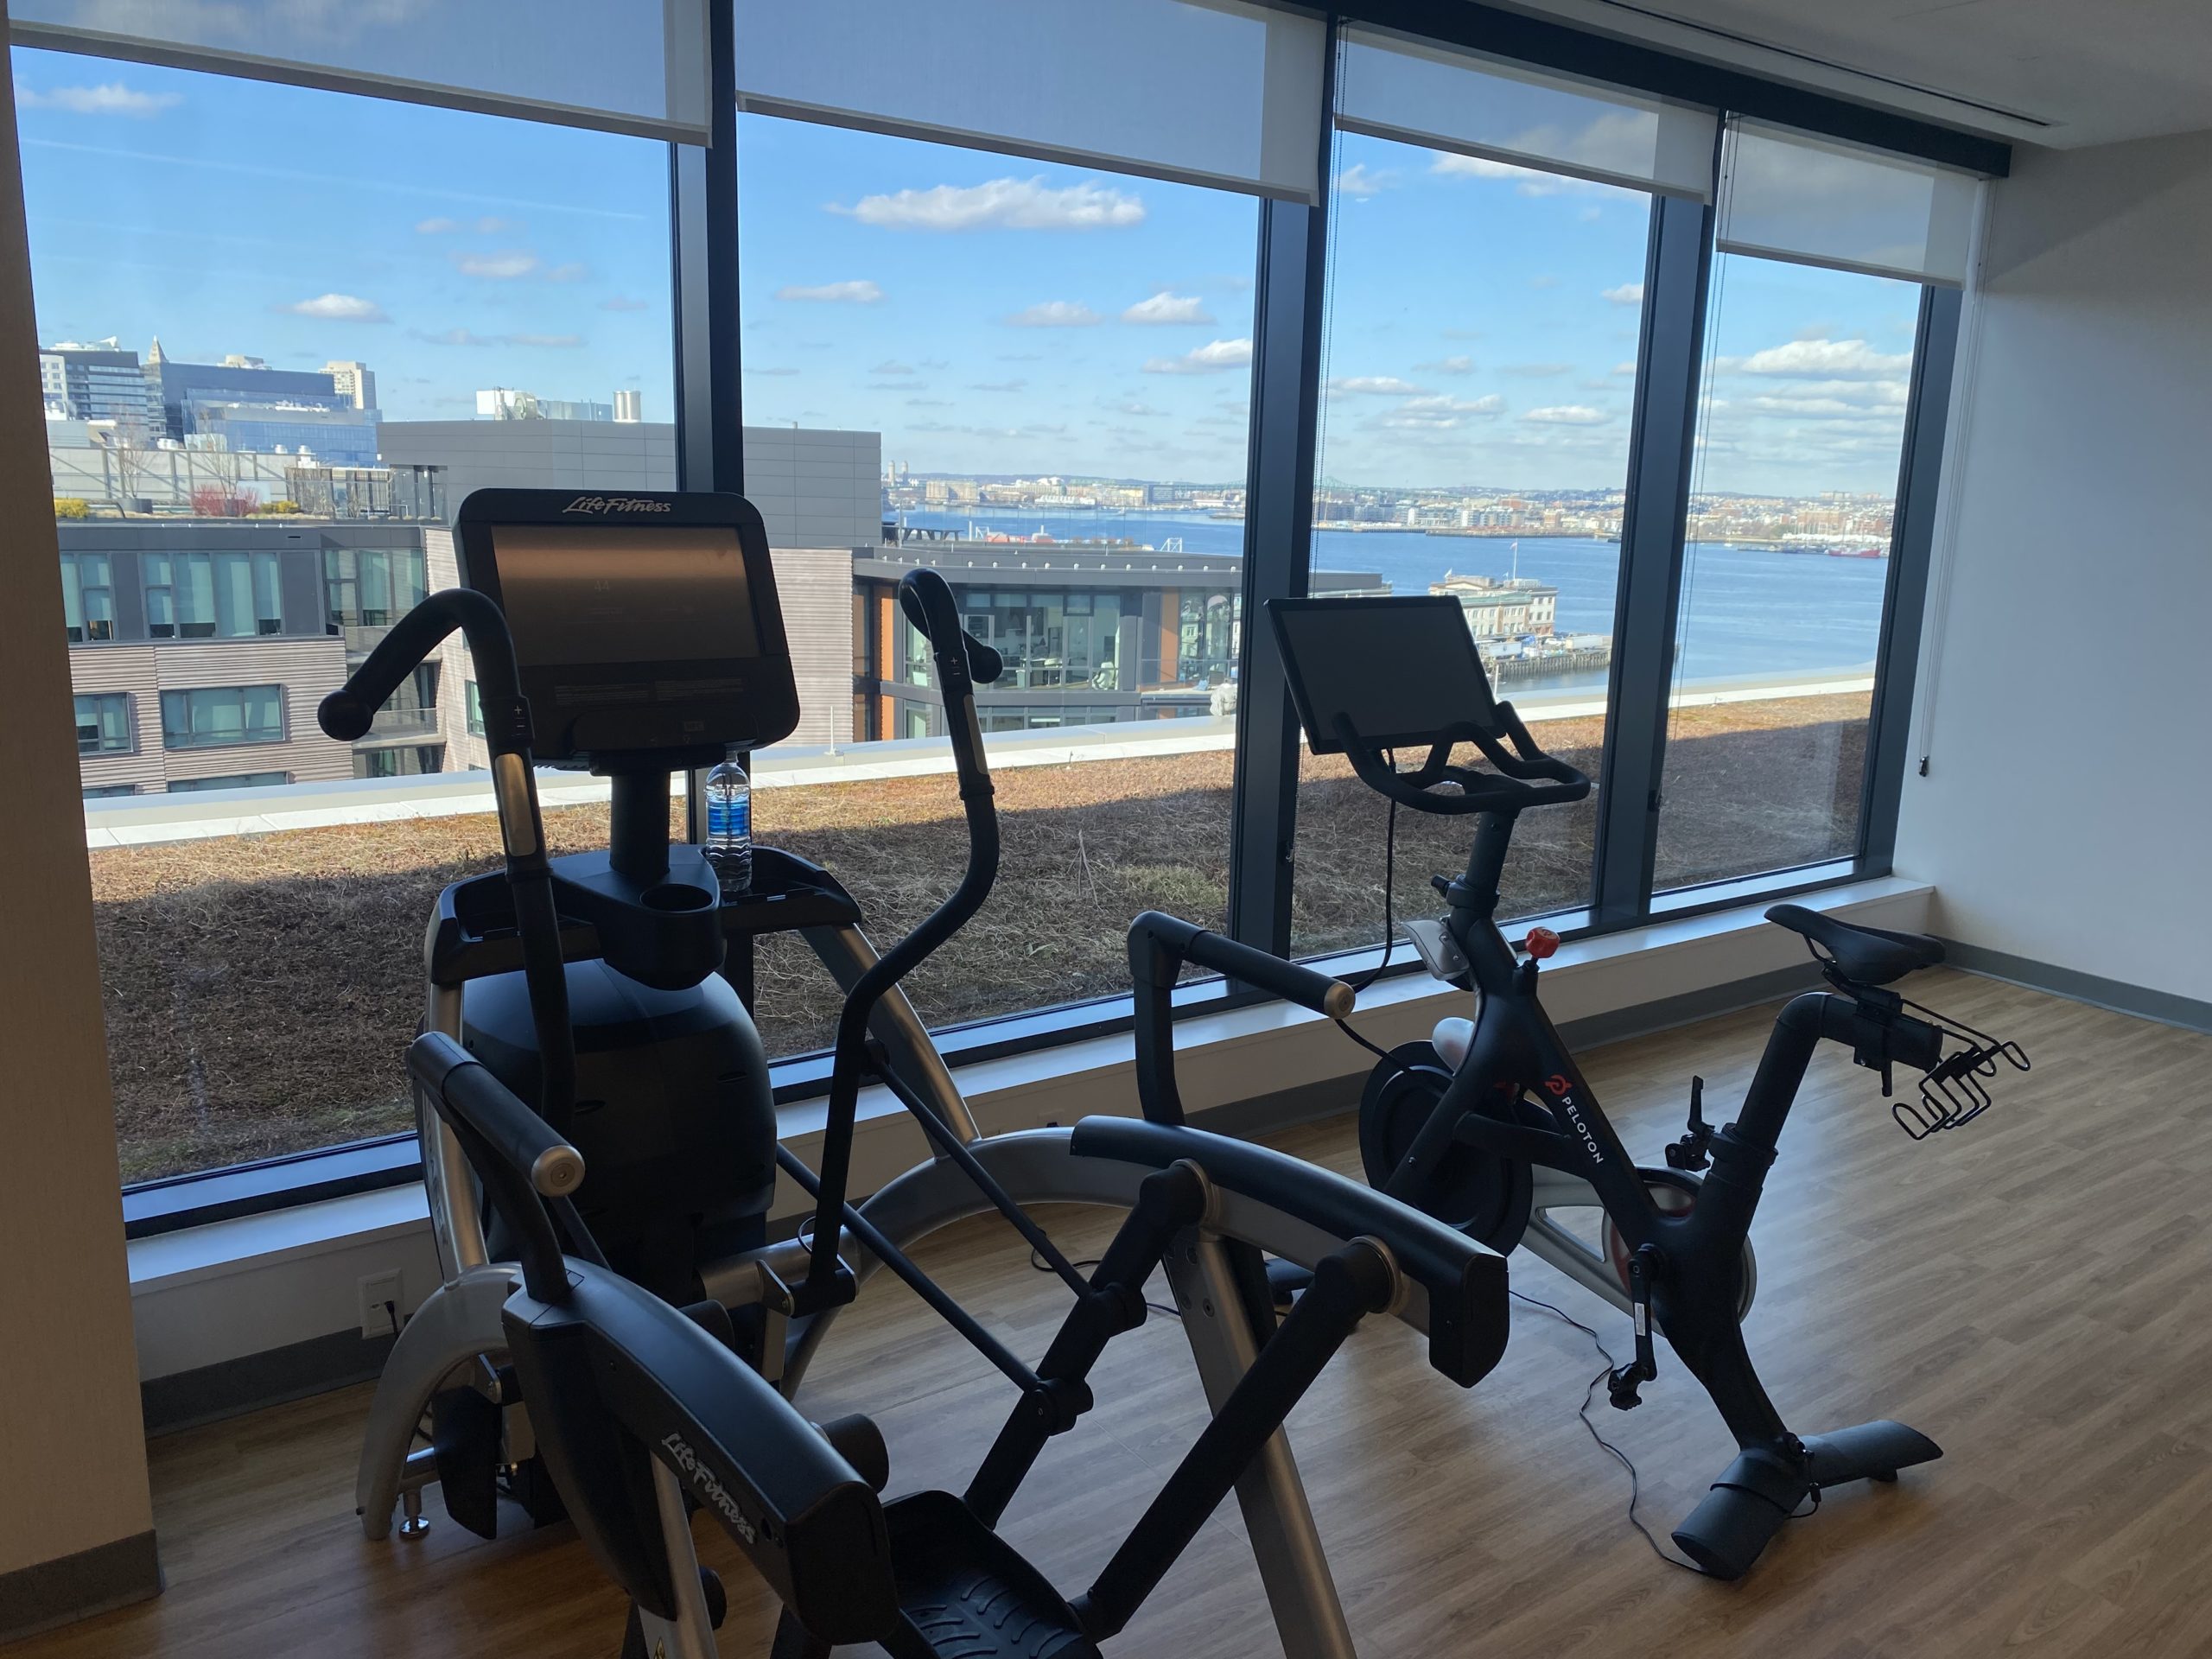 a exercise bikes in a room with windows